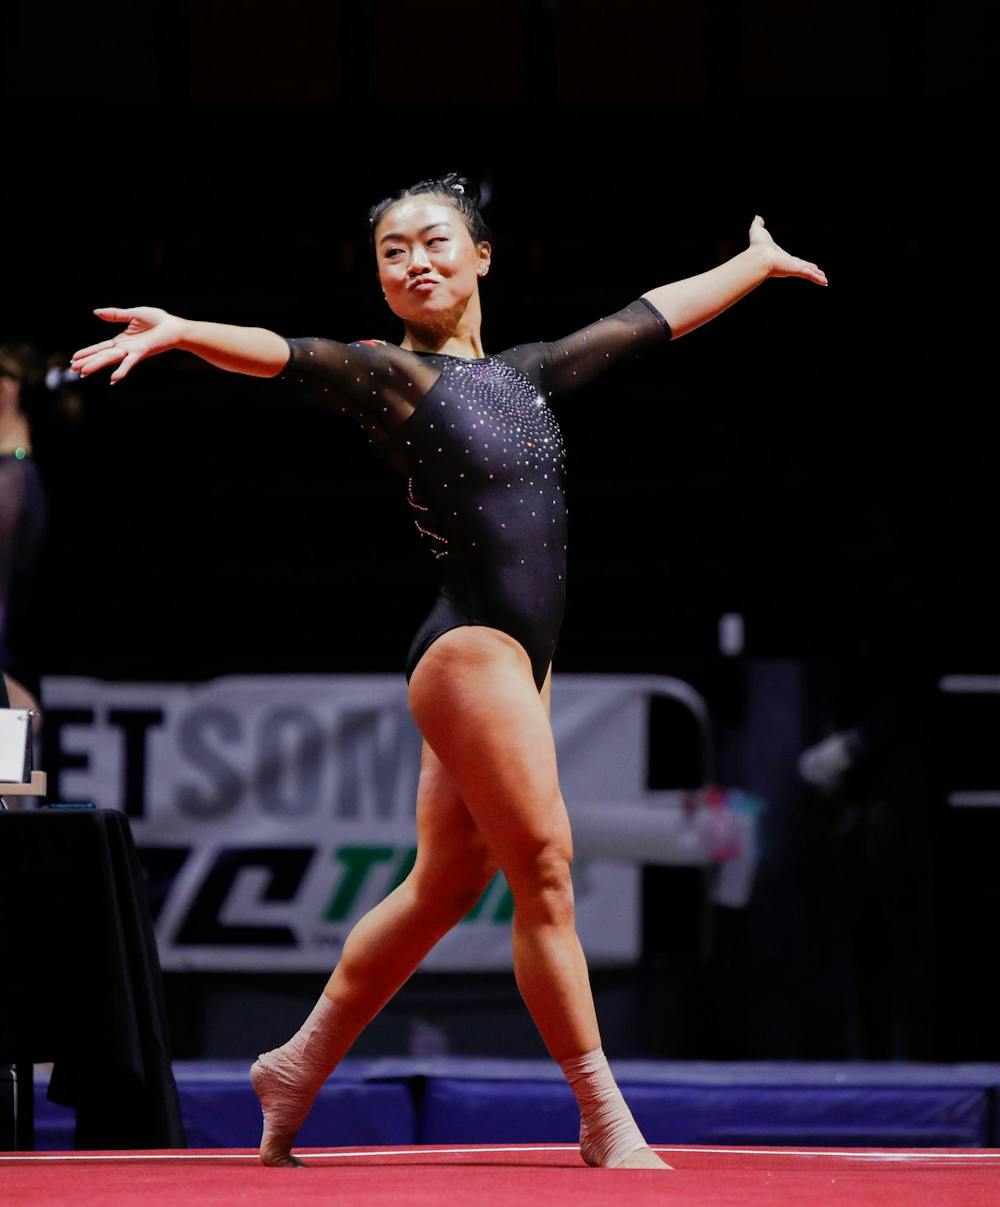 Senior all-around Suki Pfister strikes a pose during her floor routine March 23 at the Mid-American Championship at Worthen Arena. Pfister scored a 9.900 for her floor excersise. Andrew Berger, DN